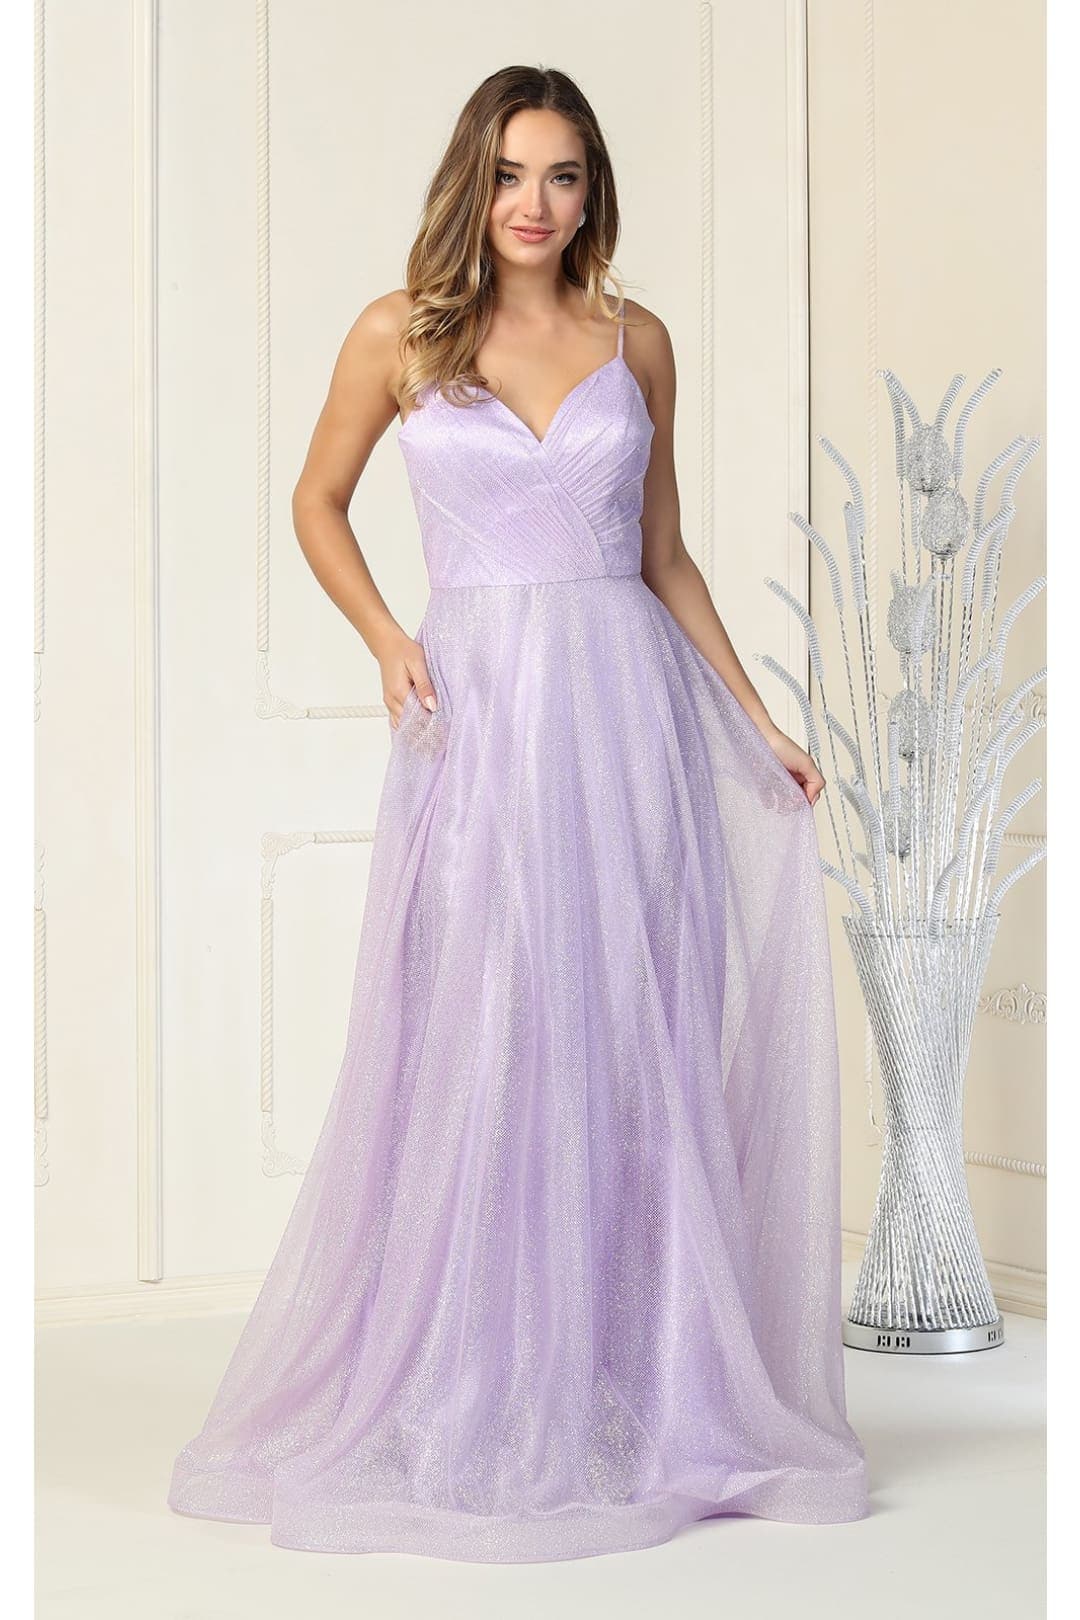 Prom Glitter Evening Gown - LILAC / 4